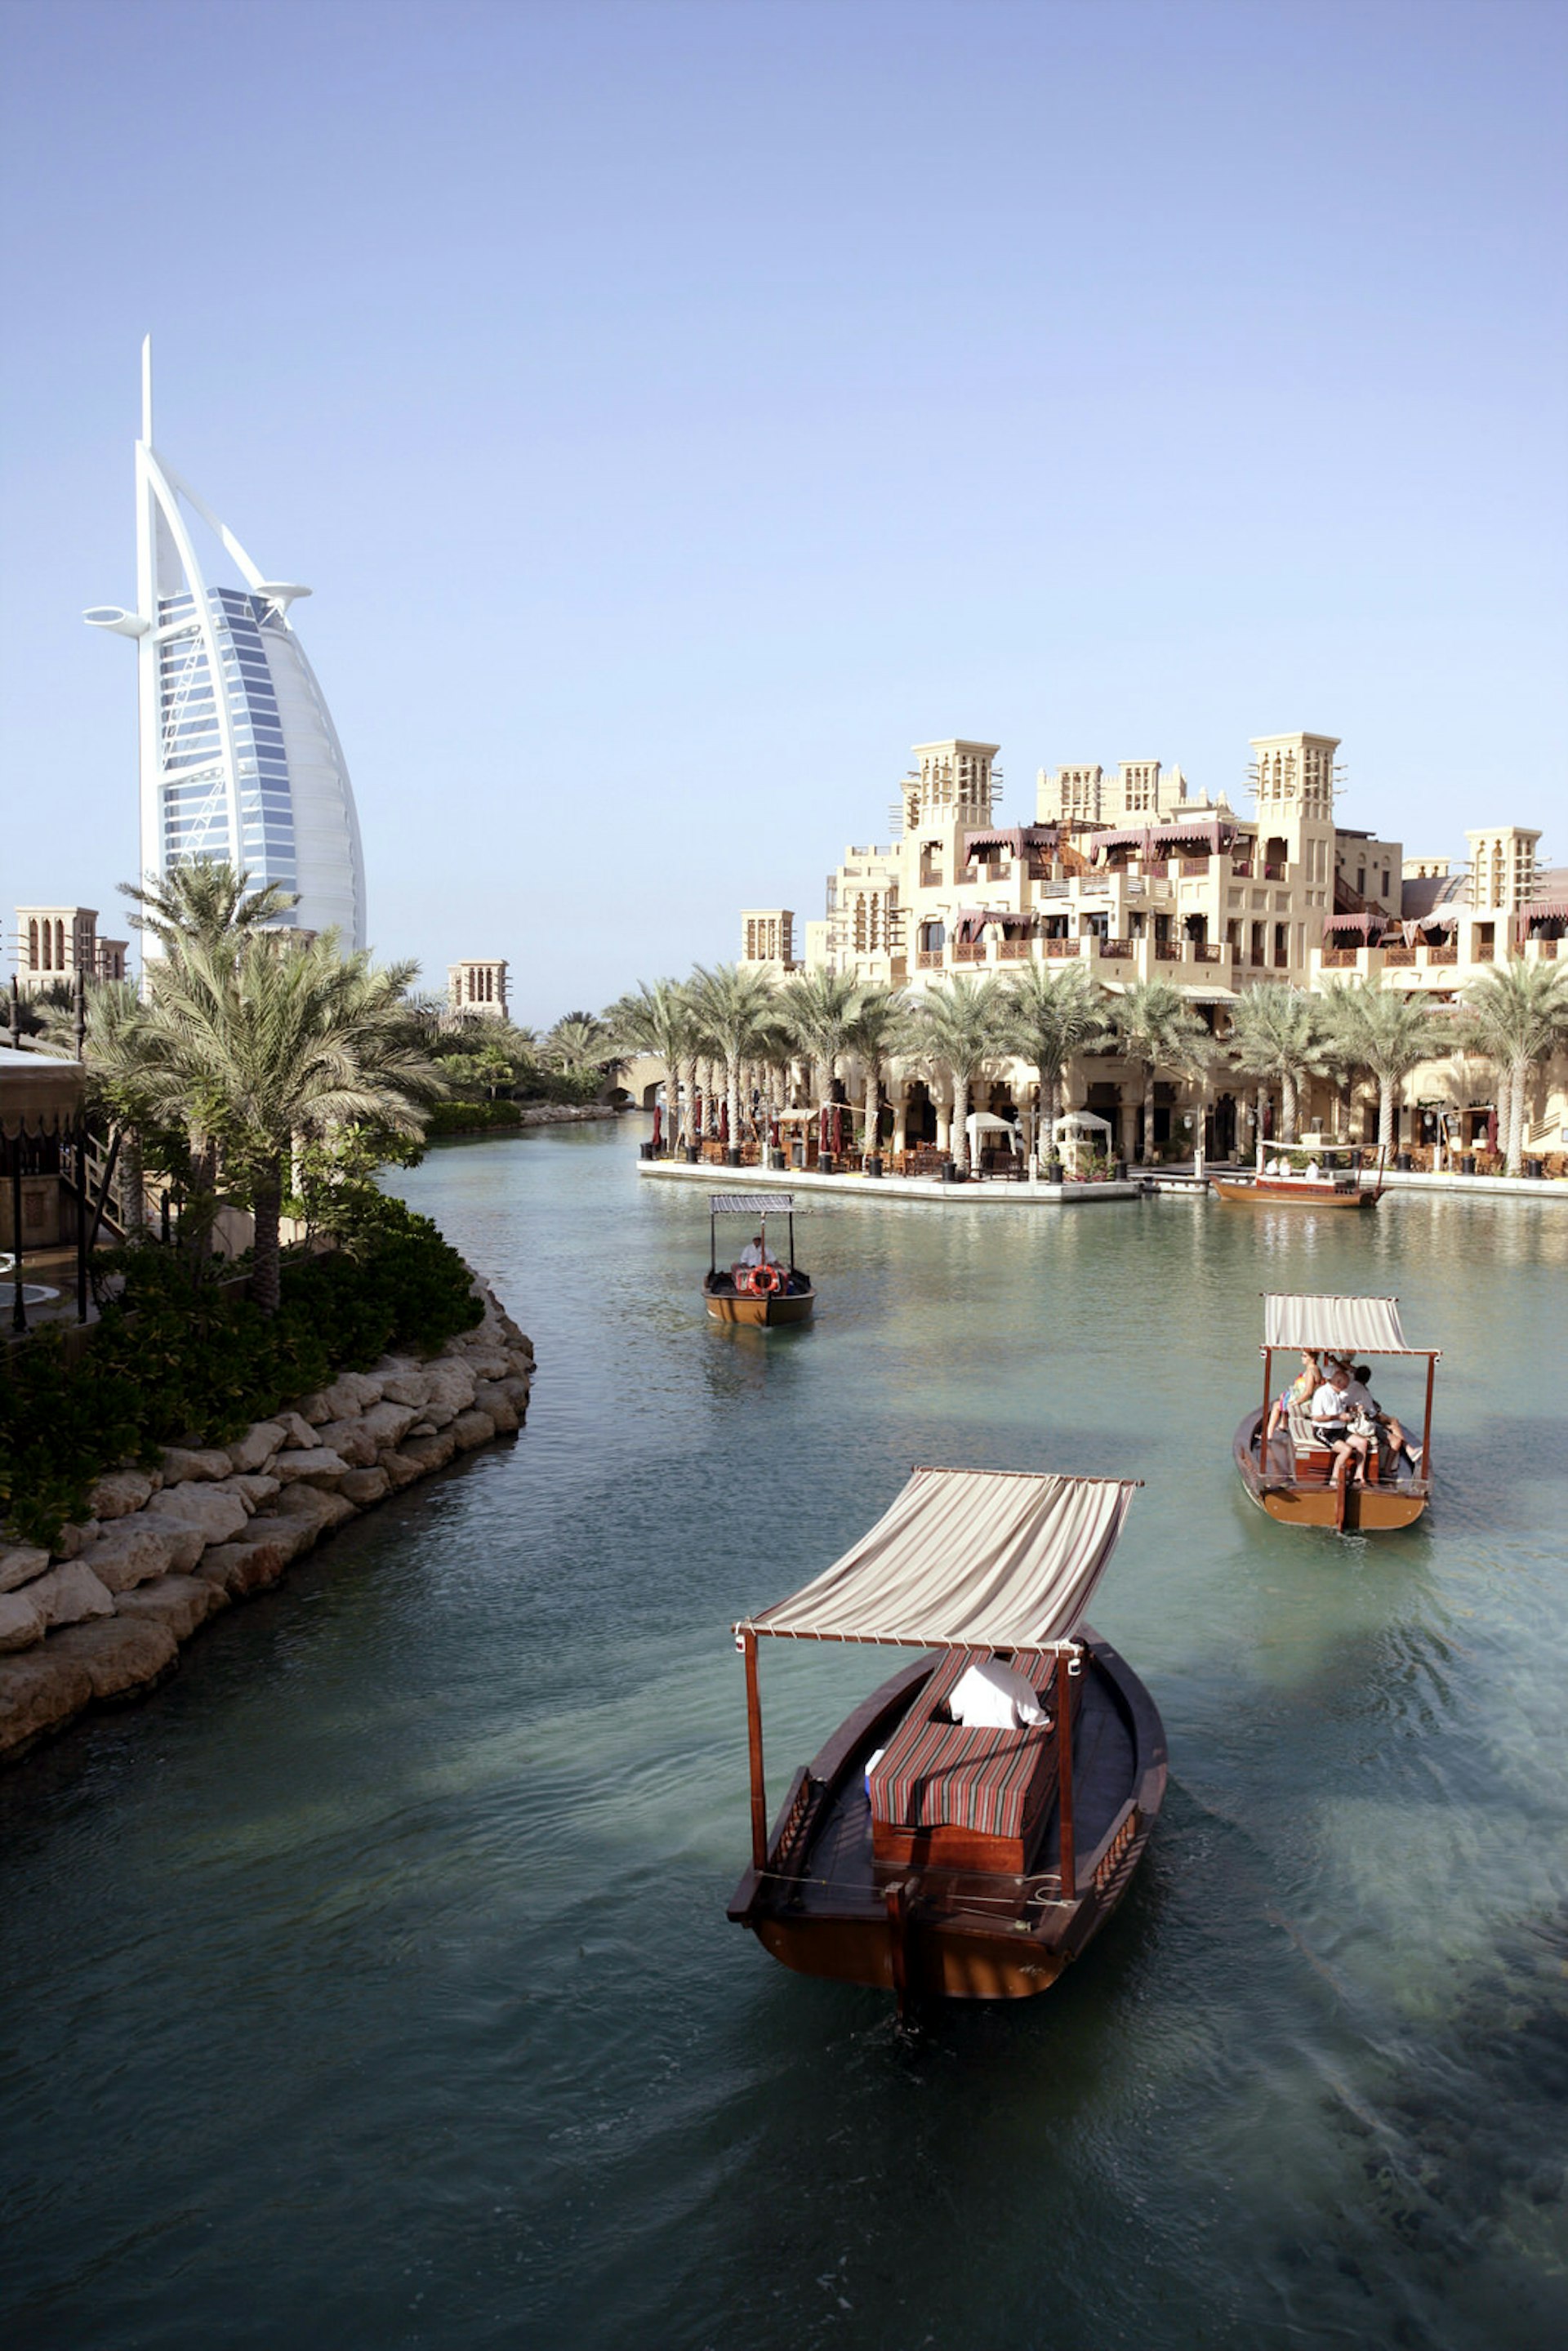 Dhows on the internal waterway at Al Qasr Hotel, Madinat Jumeirah, in Dubai, United Arab Emirates © Steve Back / Getty Images